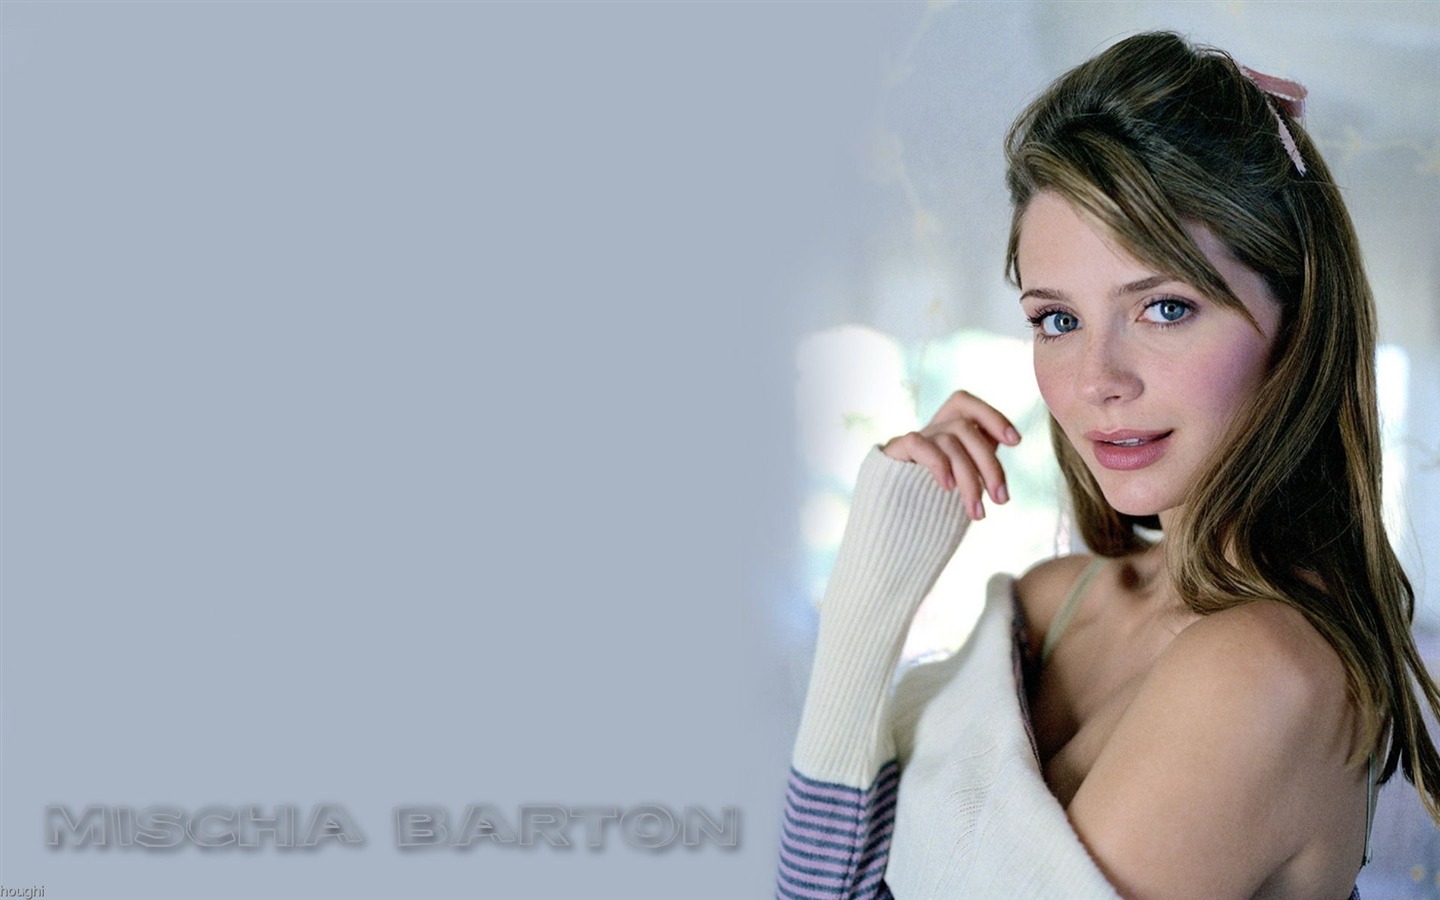 Mischa Barton #098 - 1440x900 Wallpapers Pictures Photos Images